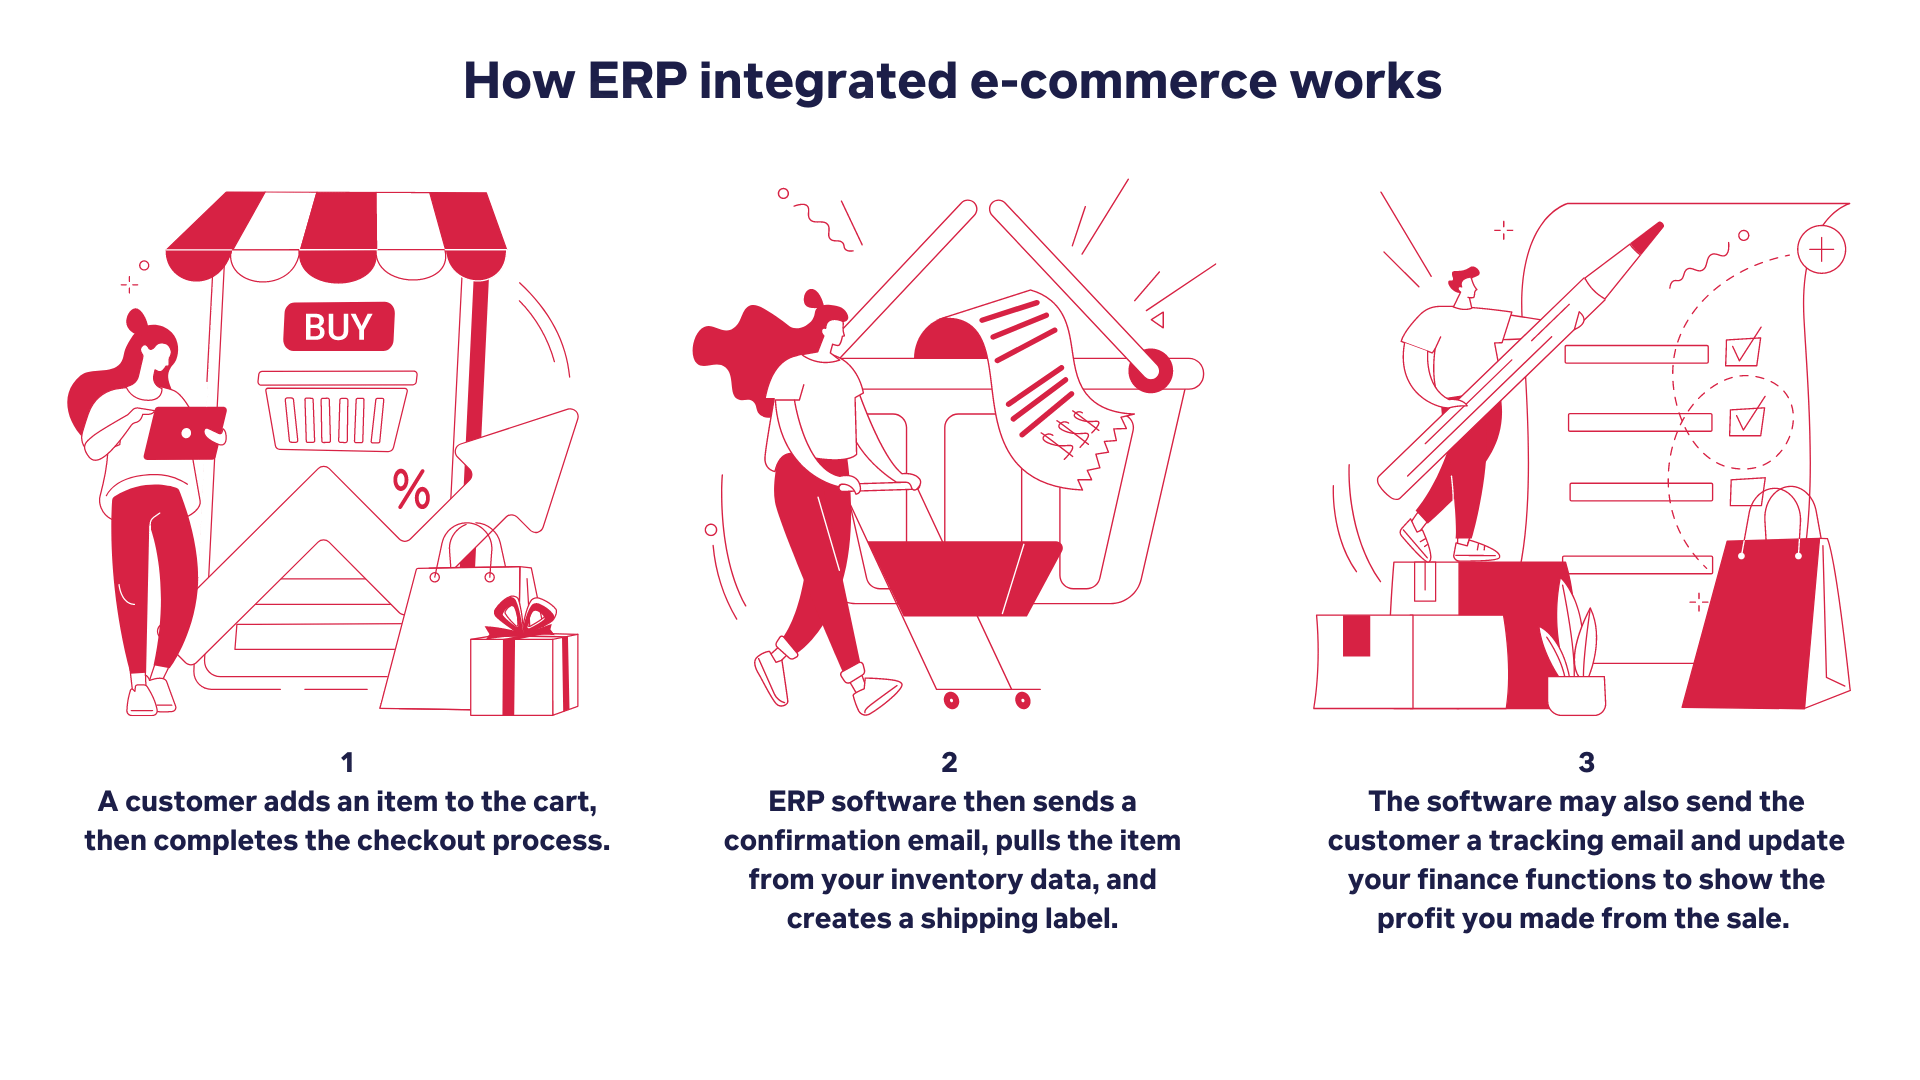 Animated infographic showcasing the purchase process with ERP integrated ecommerce